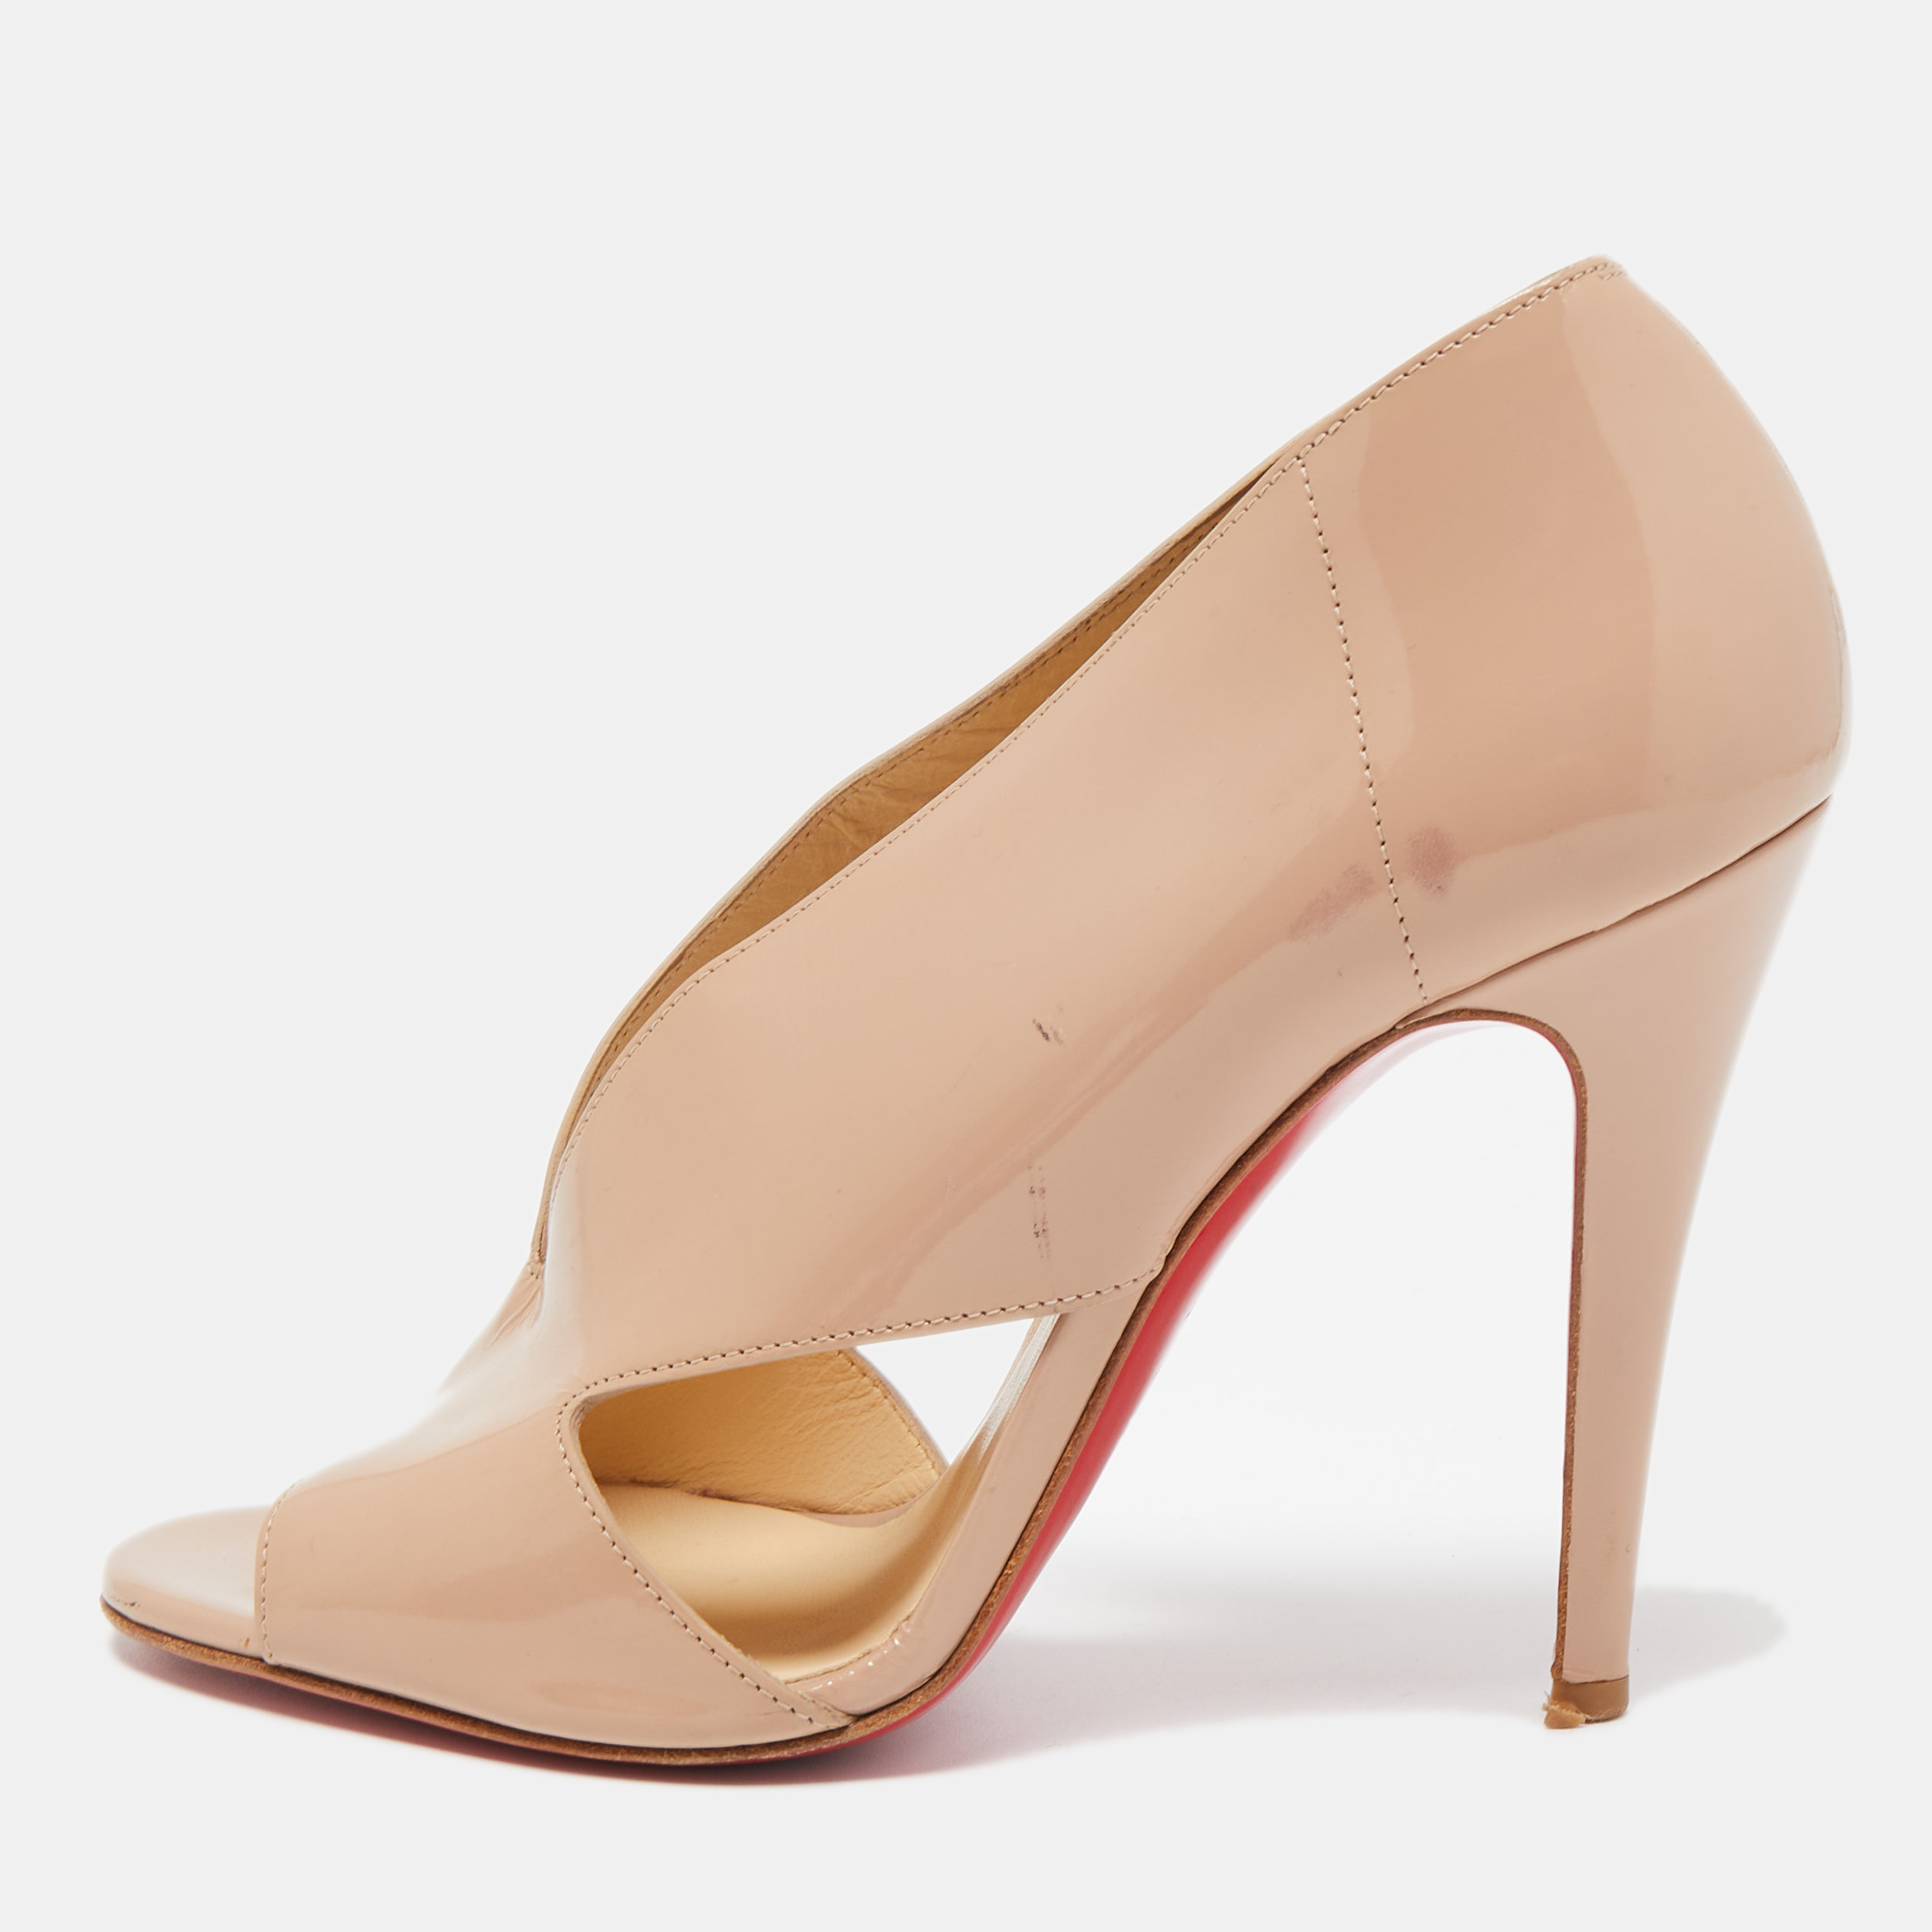 Christian Louboutin Beige Patent Cutout Accent Booties Size 37.5